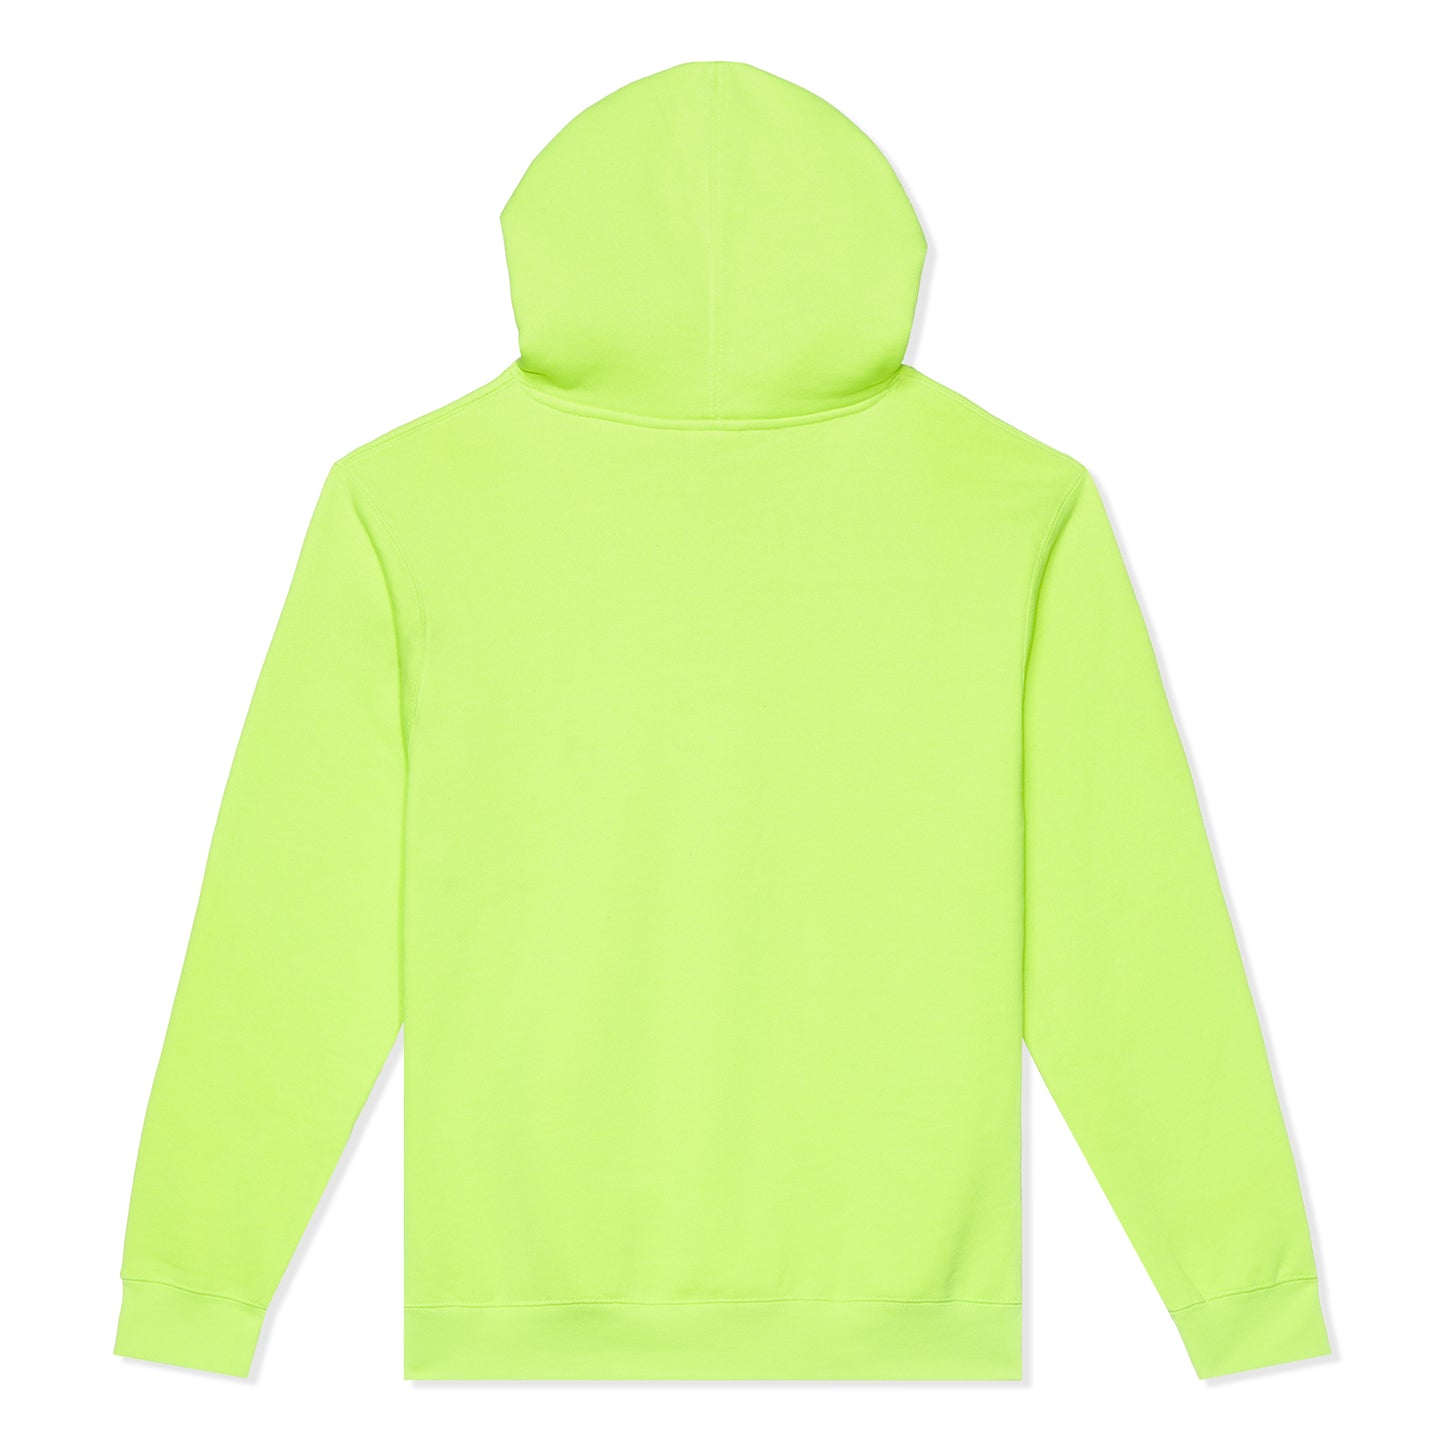 Pleasures Soundscape Hoodie (Safety Yellow)